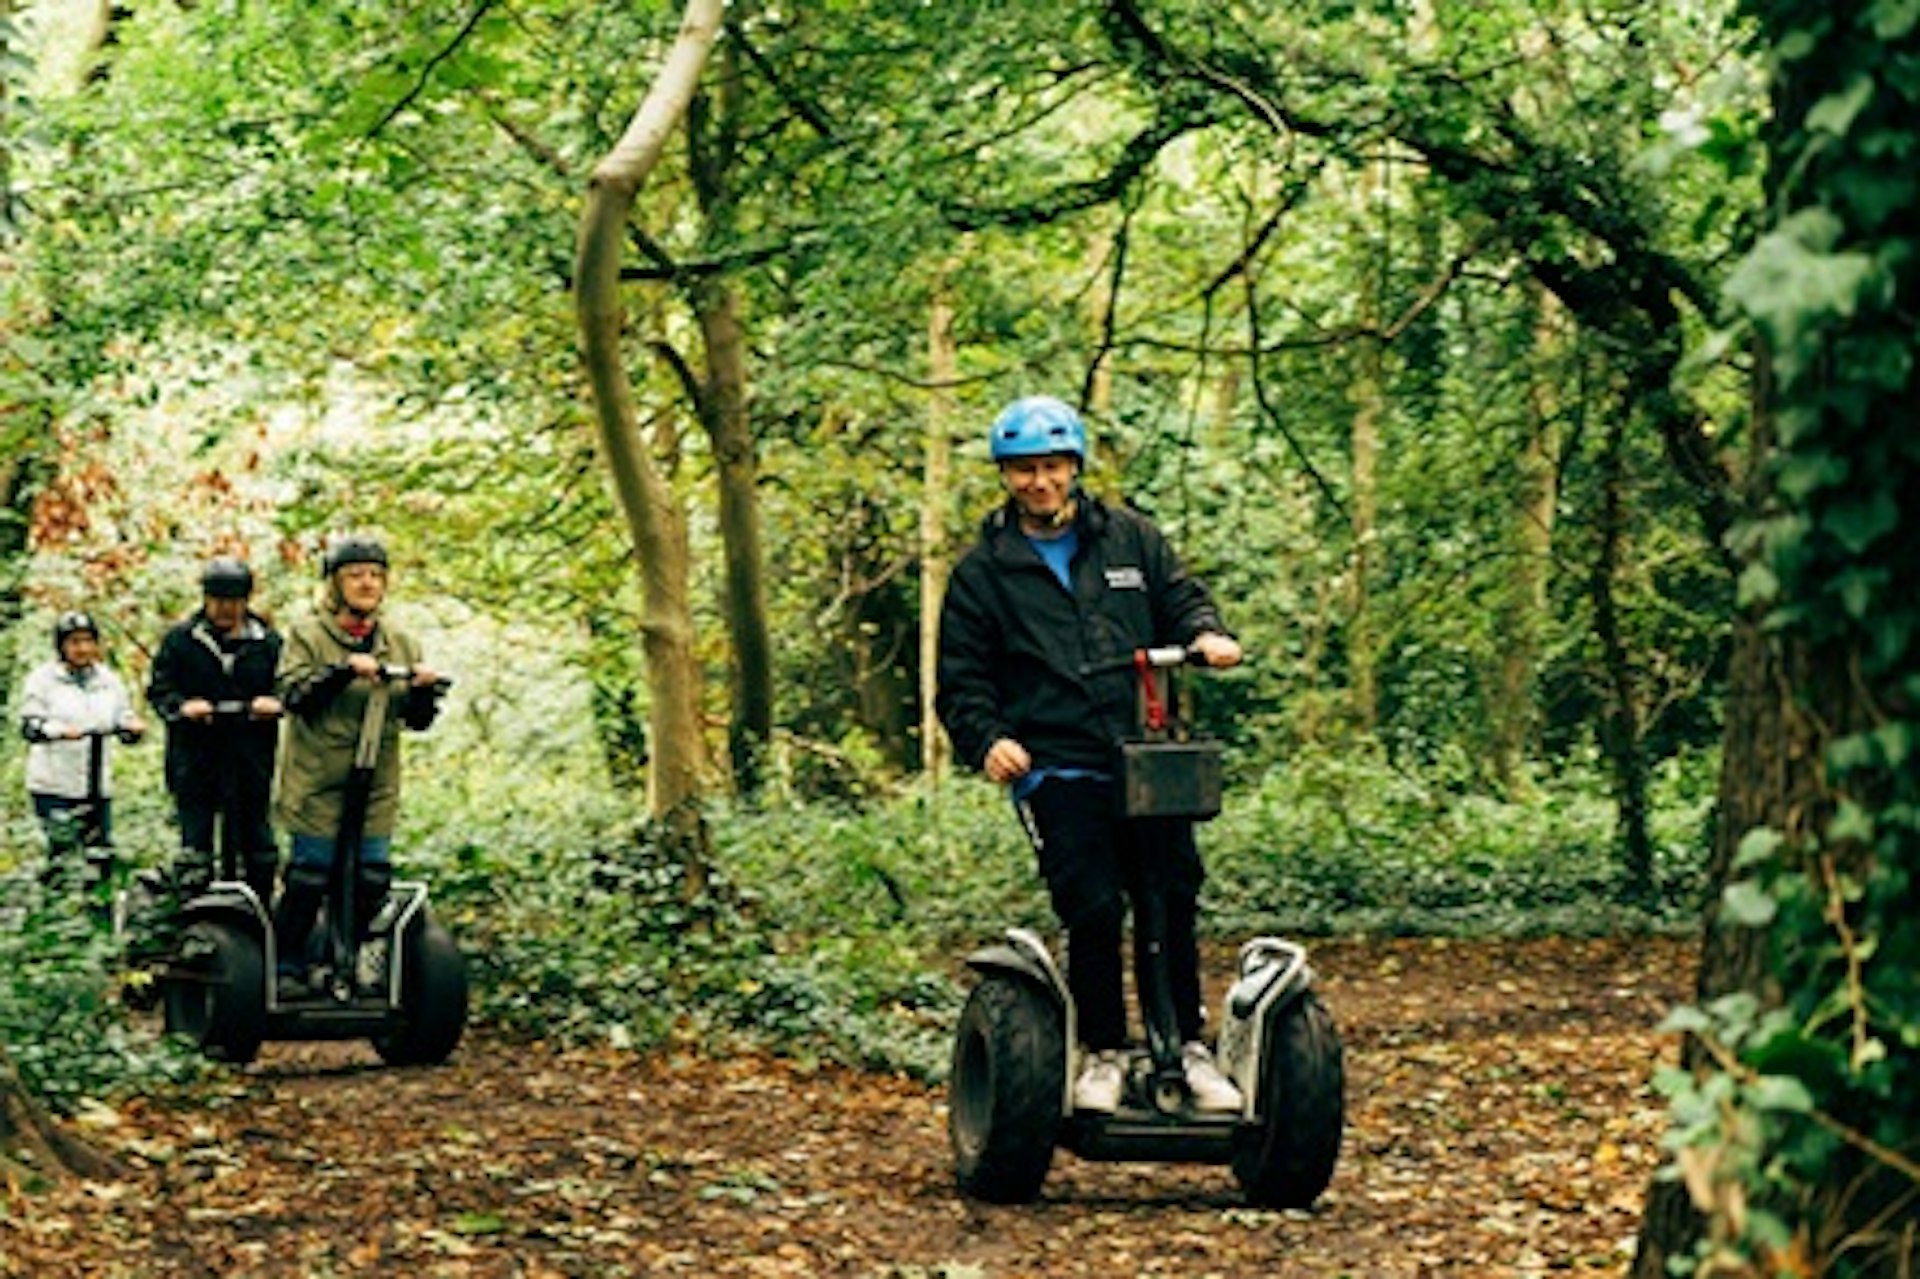 Segway Blast for Two 2